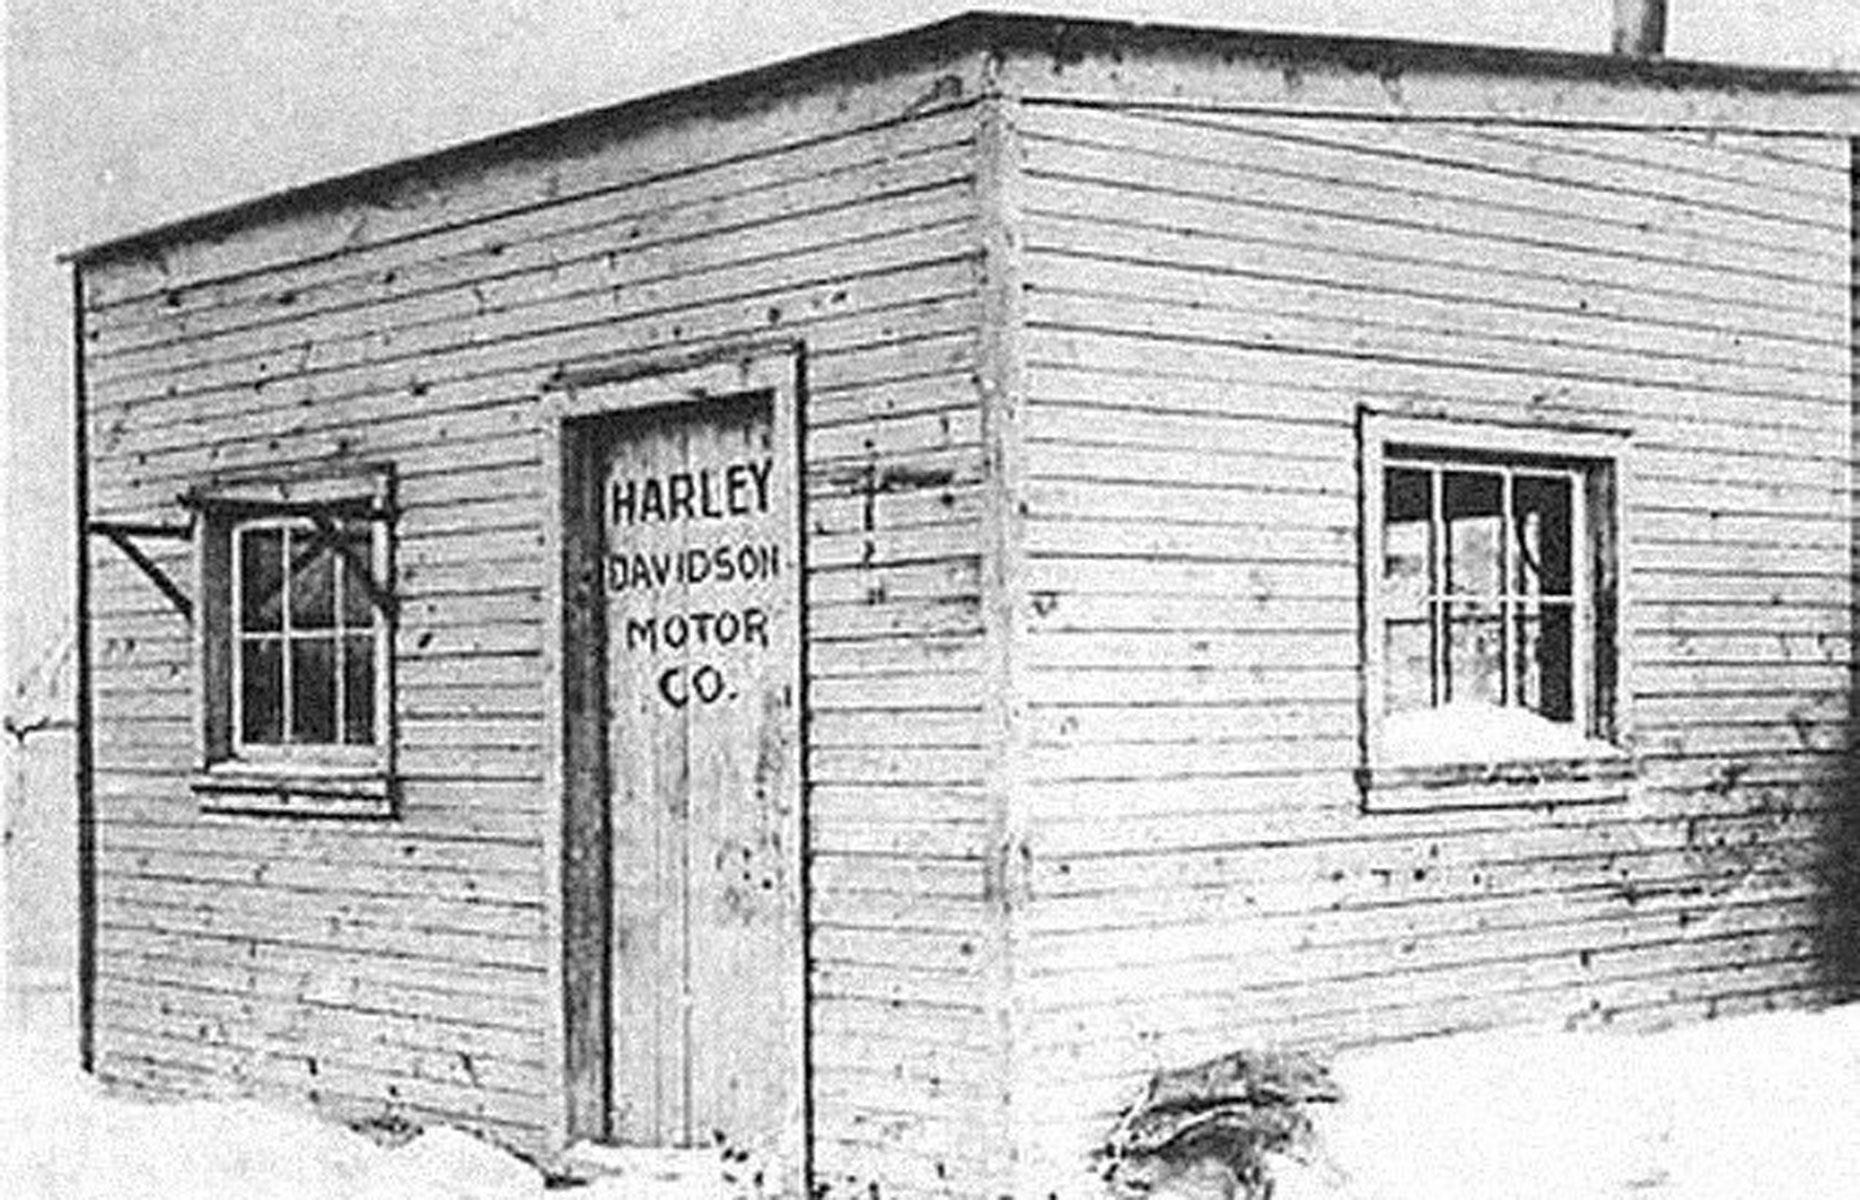 Harley-Davidson built its first motorcycle in a backyard shed